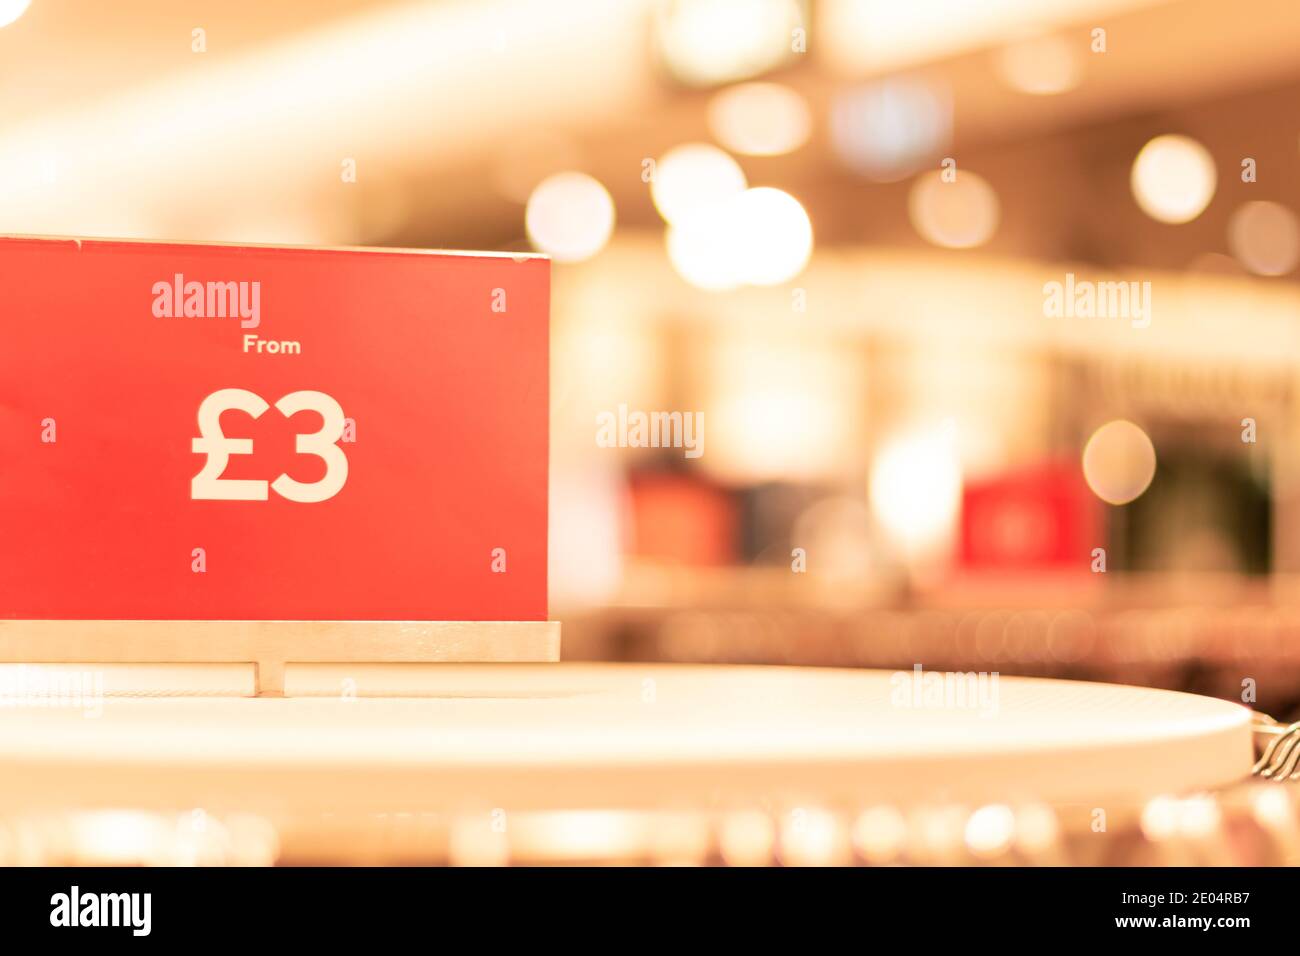 Oxford, UK -14 Dec 2020: Red Sale price tag closeup in Hennes and Mauritz AB store, prices from three pounds sign, blurry background behind the sign Stock Photo